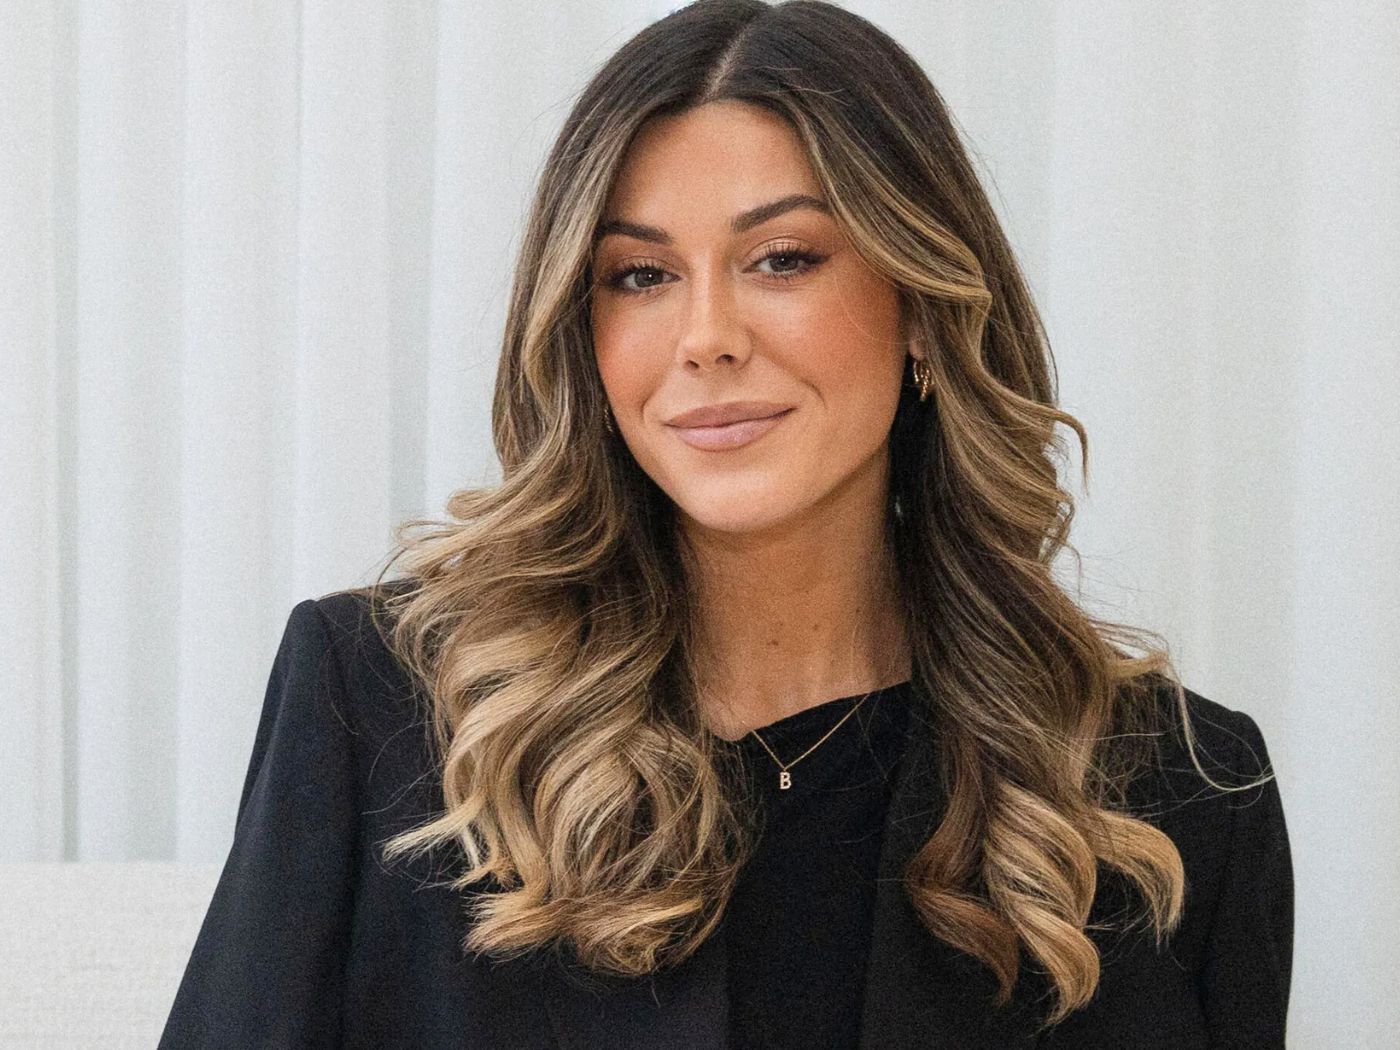 A woman with long, centre-parted hair with waves, and glowing make-up, wearing a black blazer and sweater.